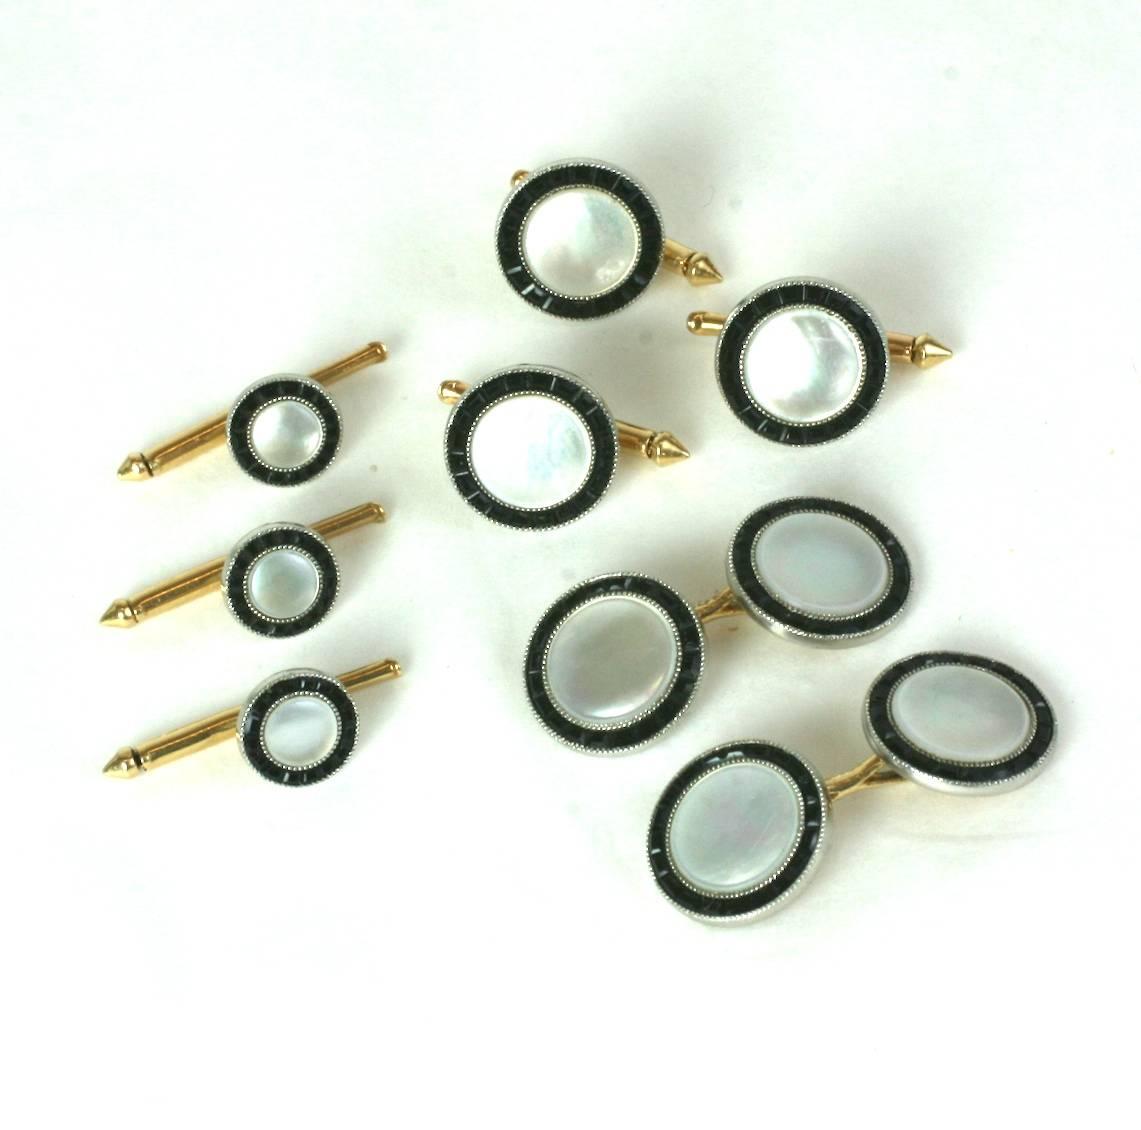 Elegant Art Deco Mother of Pearl and Calibre Onyx Stud Set set in 14k gold. Very lovely quality manufacture with outer rings of onyx which have been 